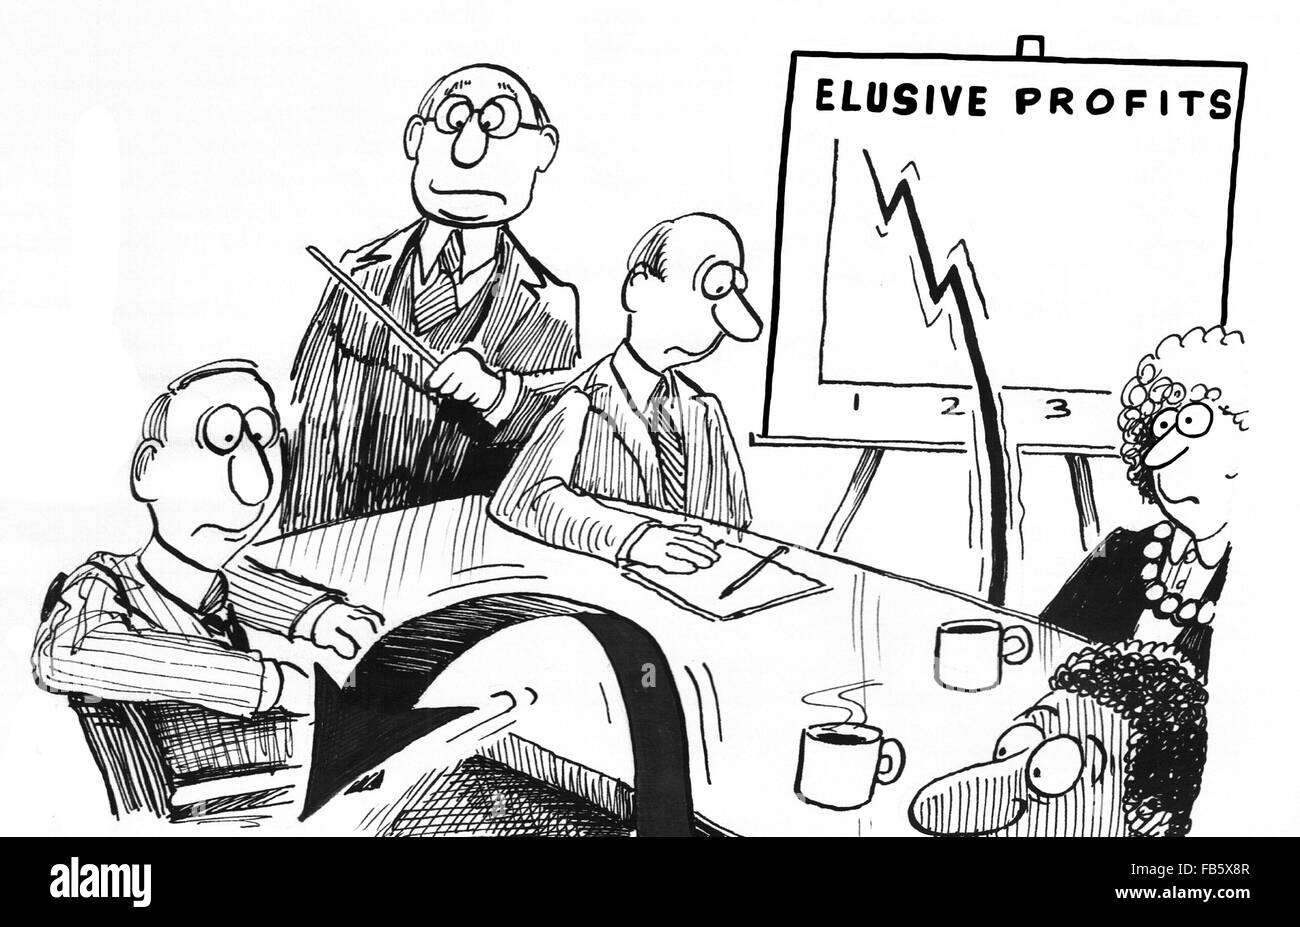 Business cartoon about finance.  The profits were falling so fast they were elusive. Stock Photo